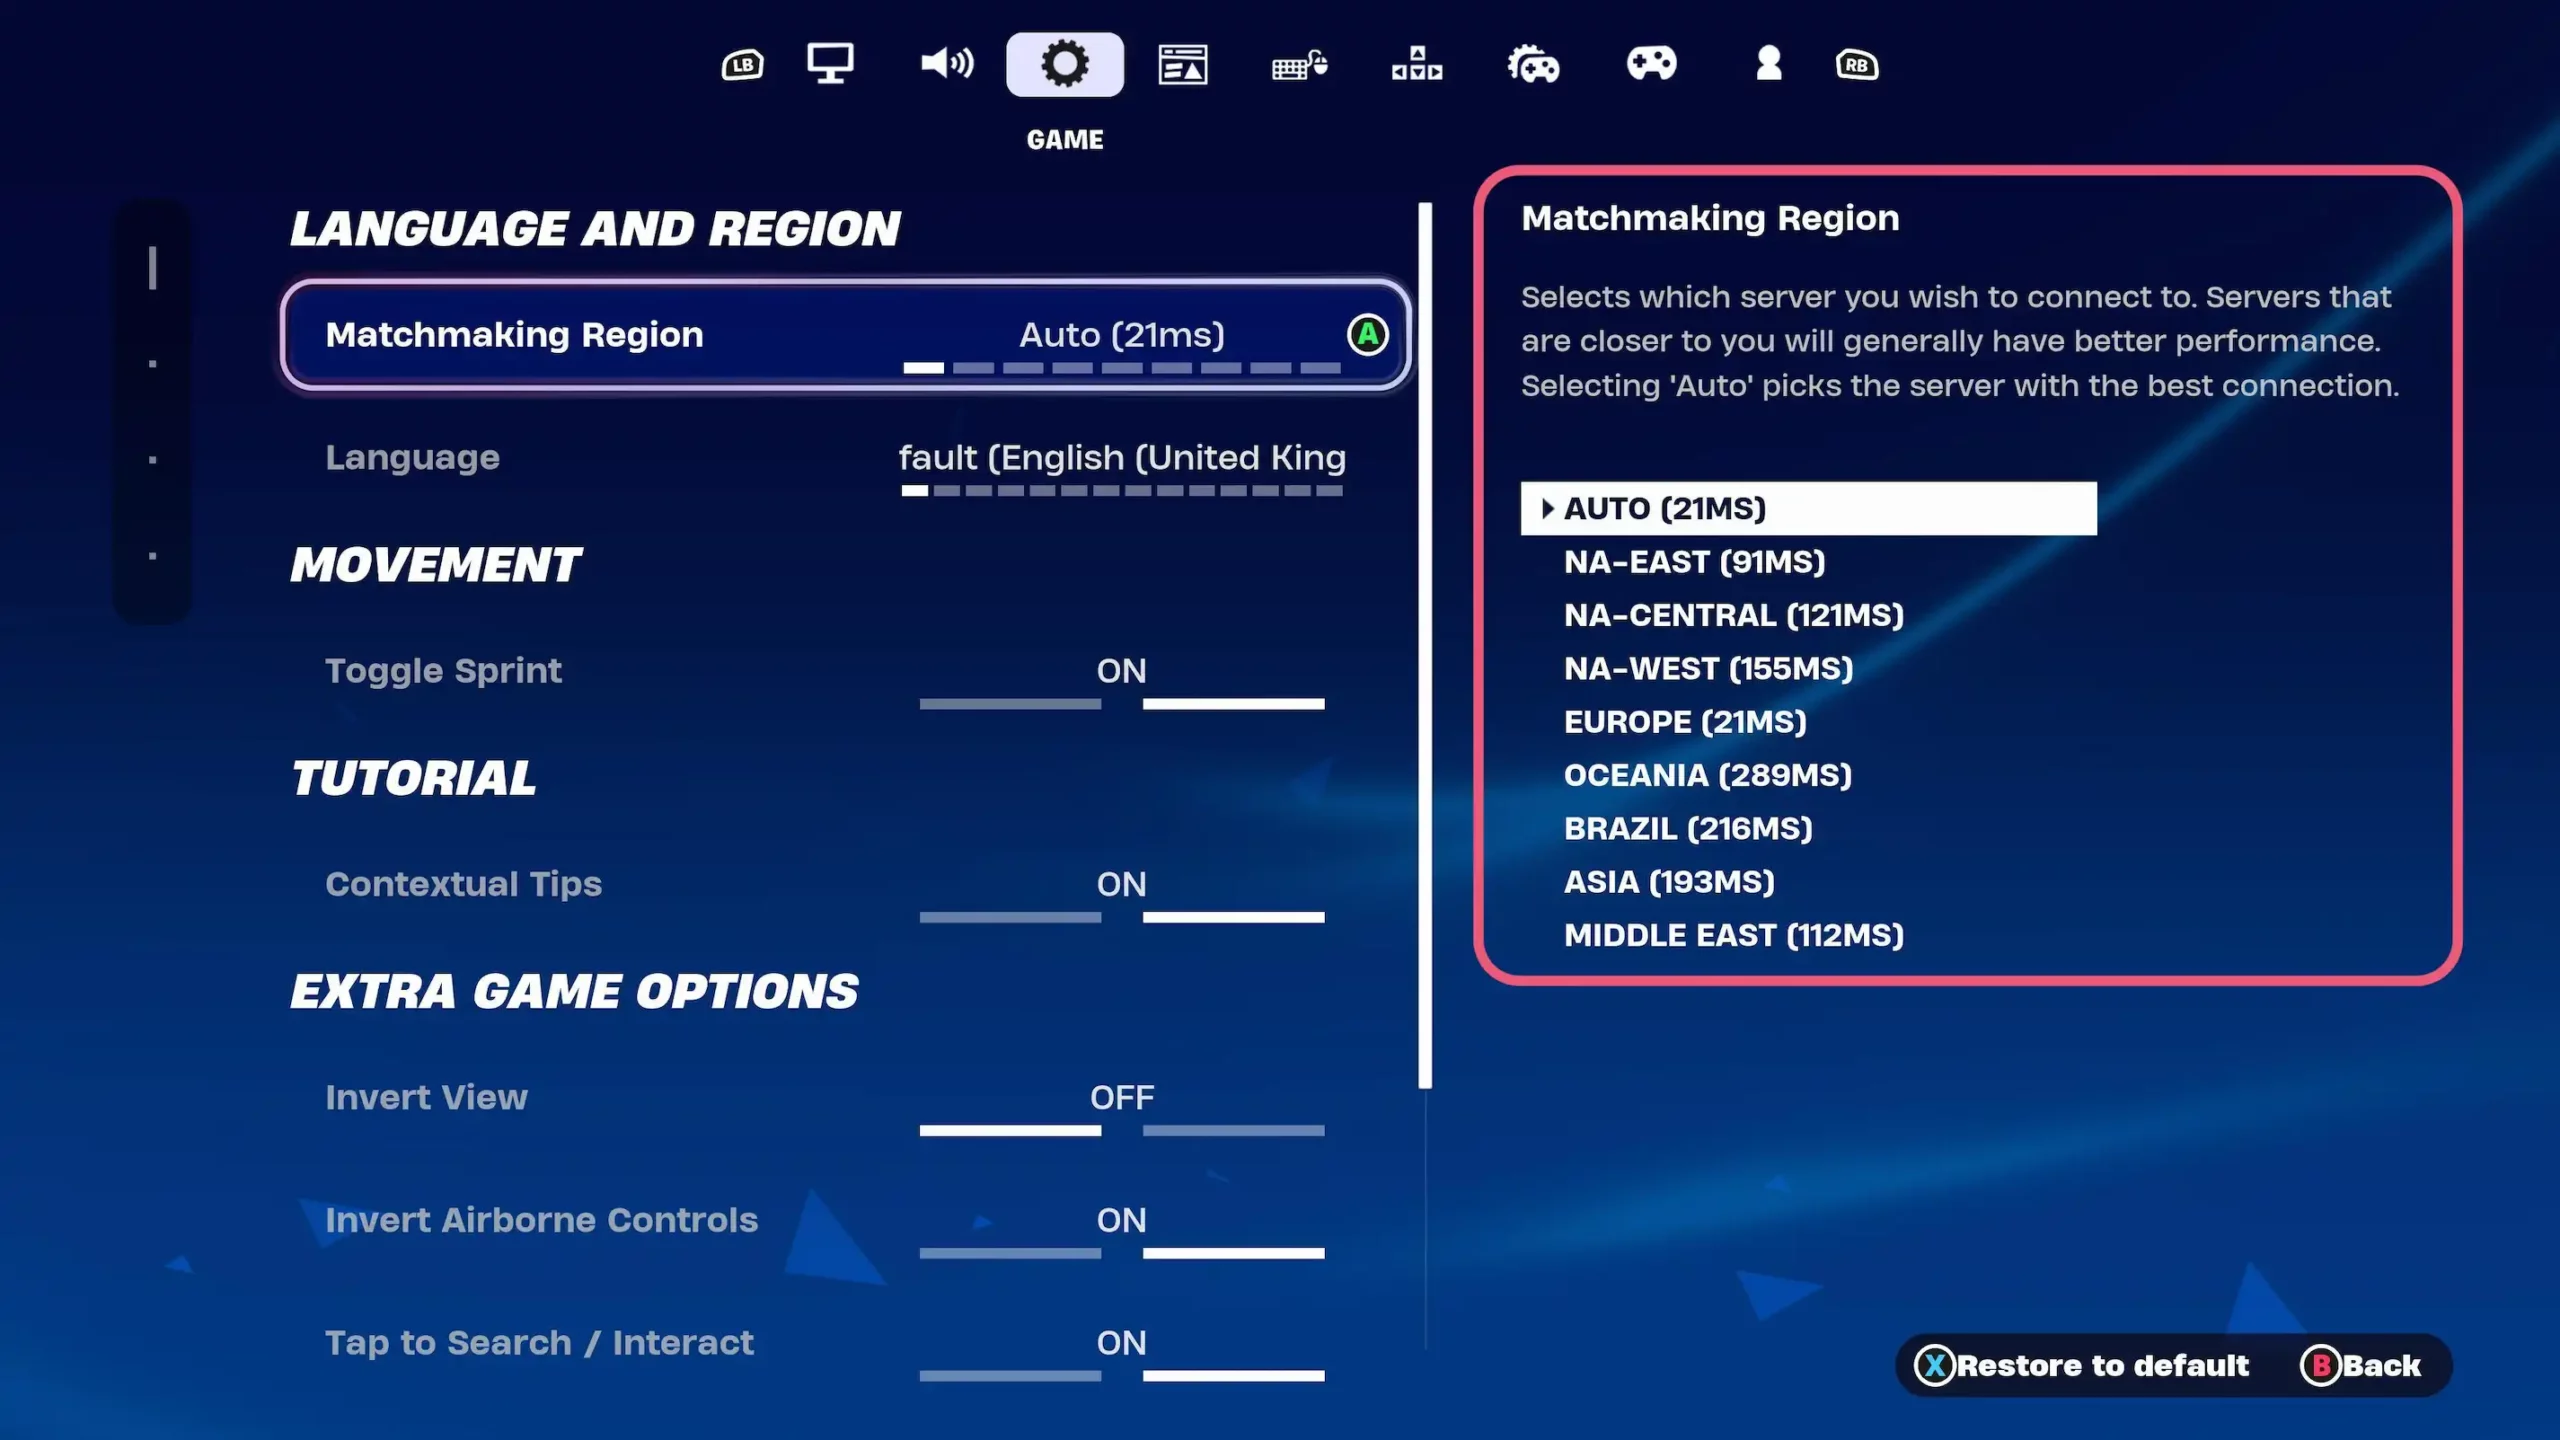 Screenshot of Fortnite's game settings with matchmaking region highlighted